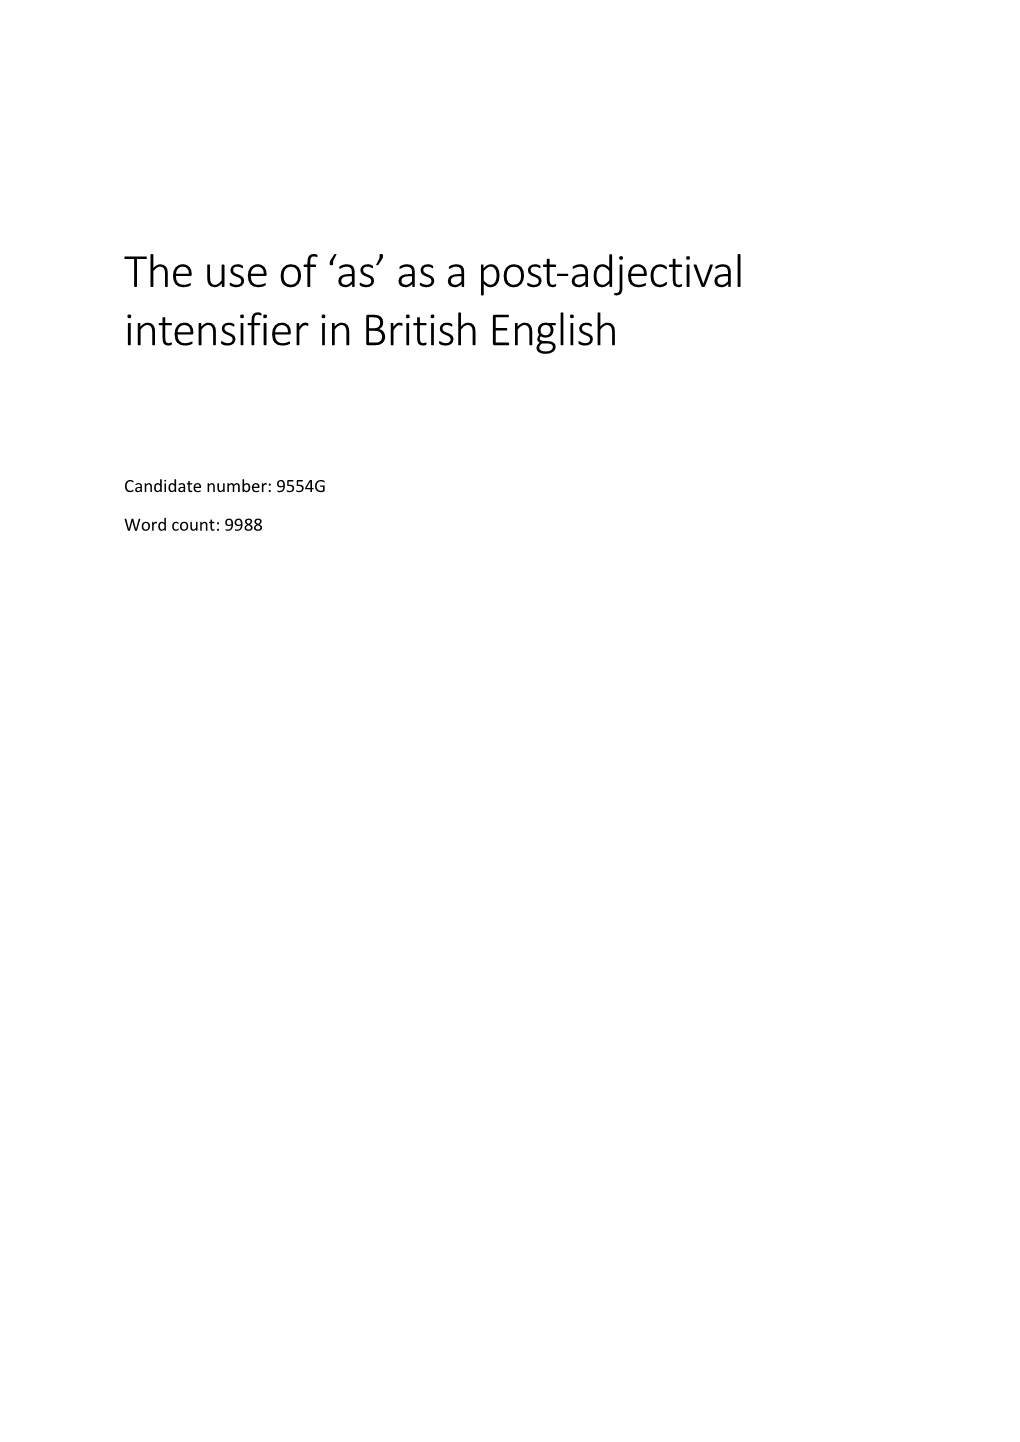 The Use of 'As' As a Post-Adjectival Intensifier in British English